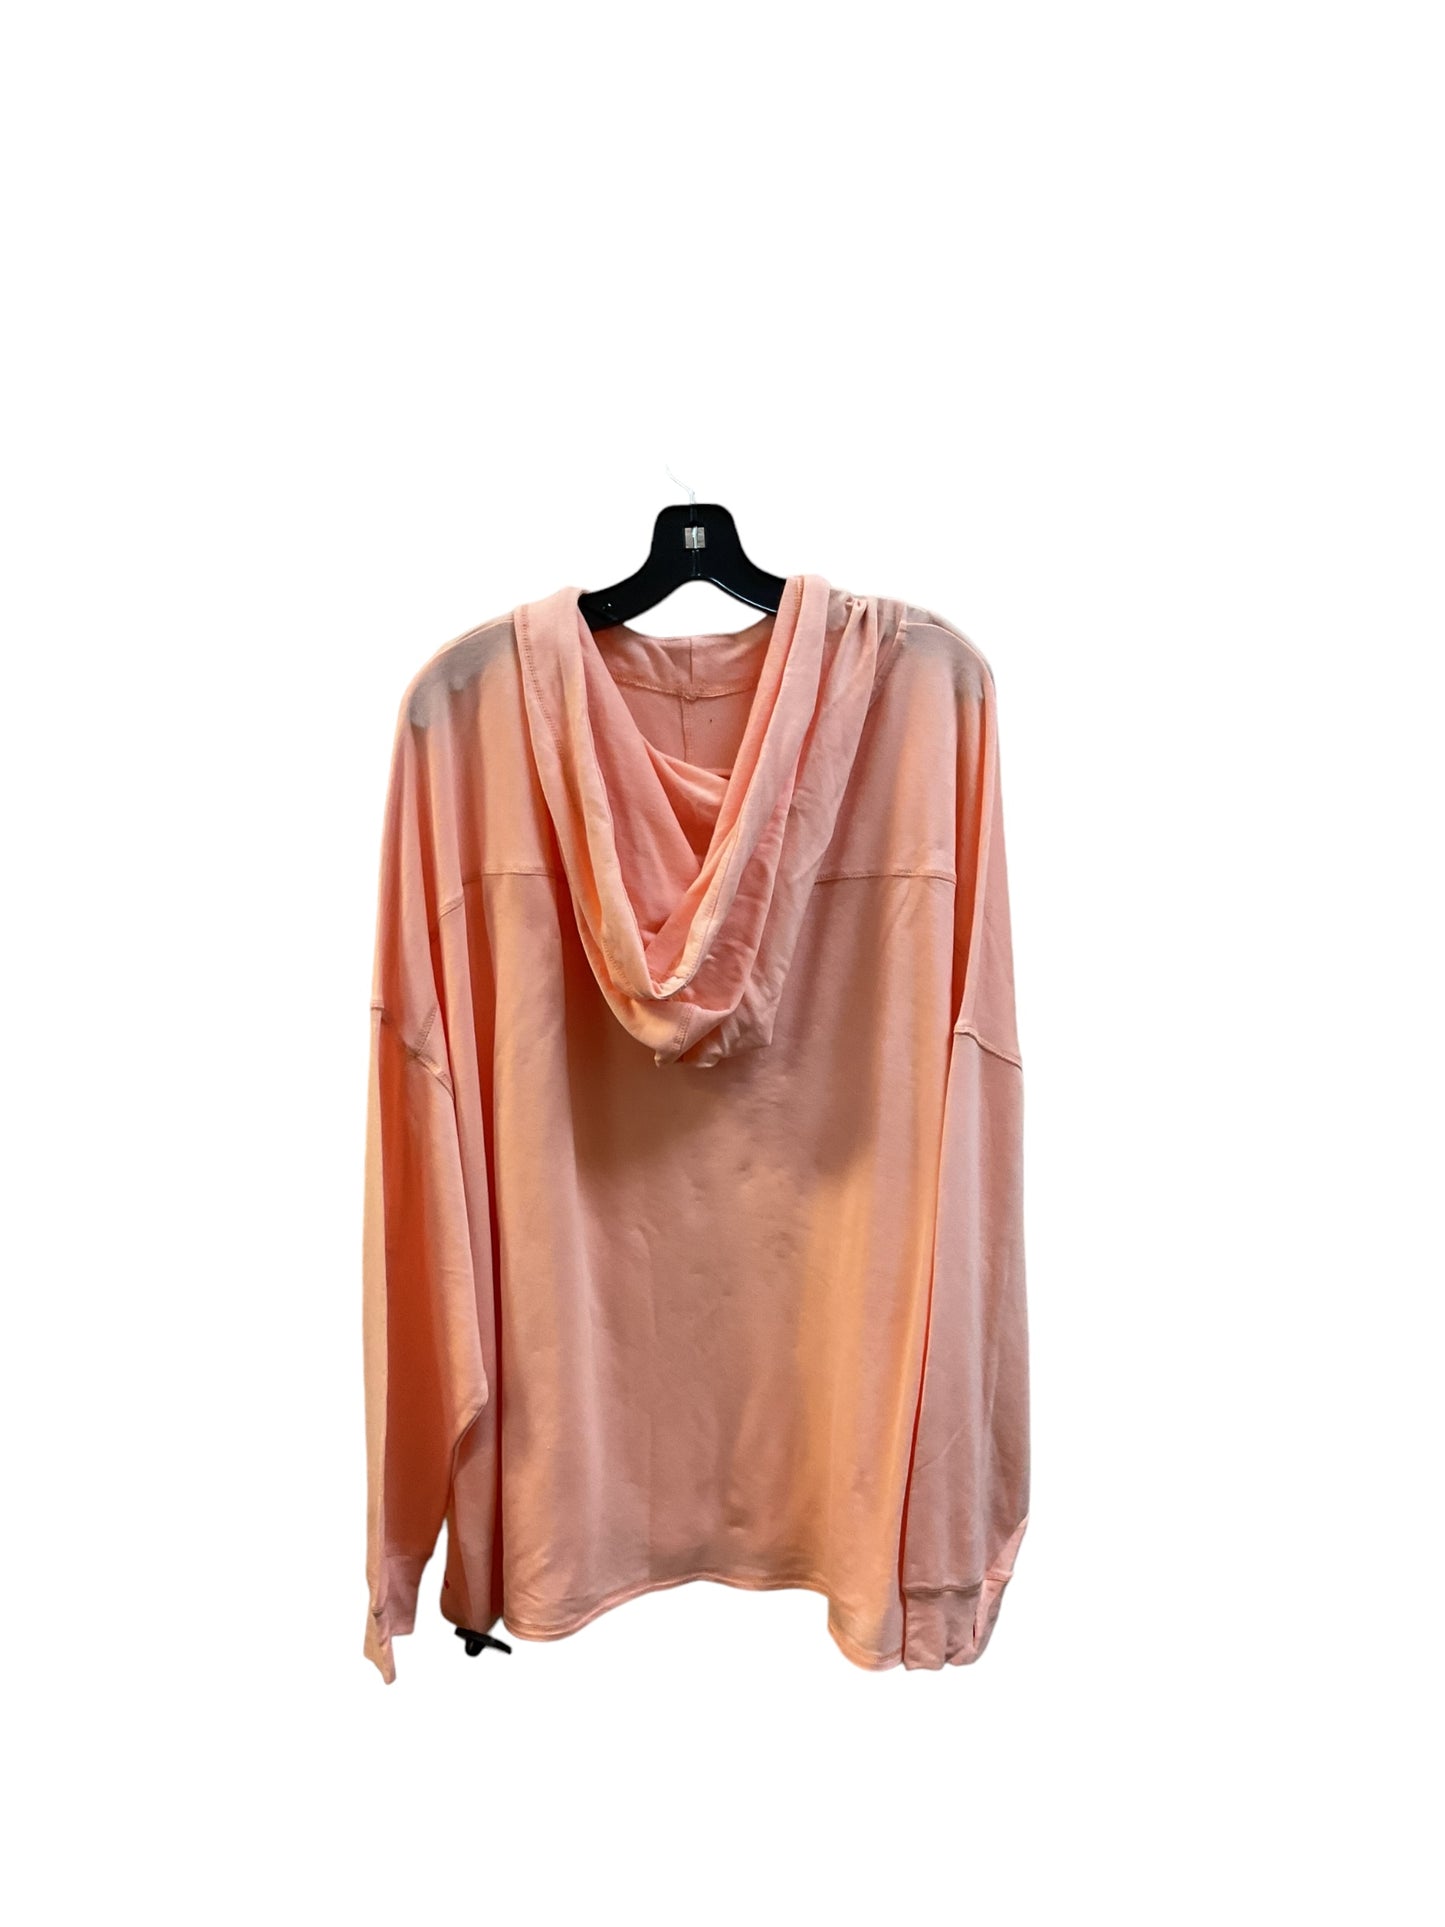 Top Long Sleeve By Clothes Mentor  Size: 4x